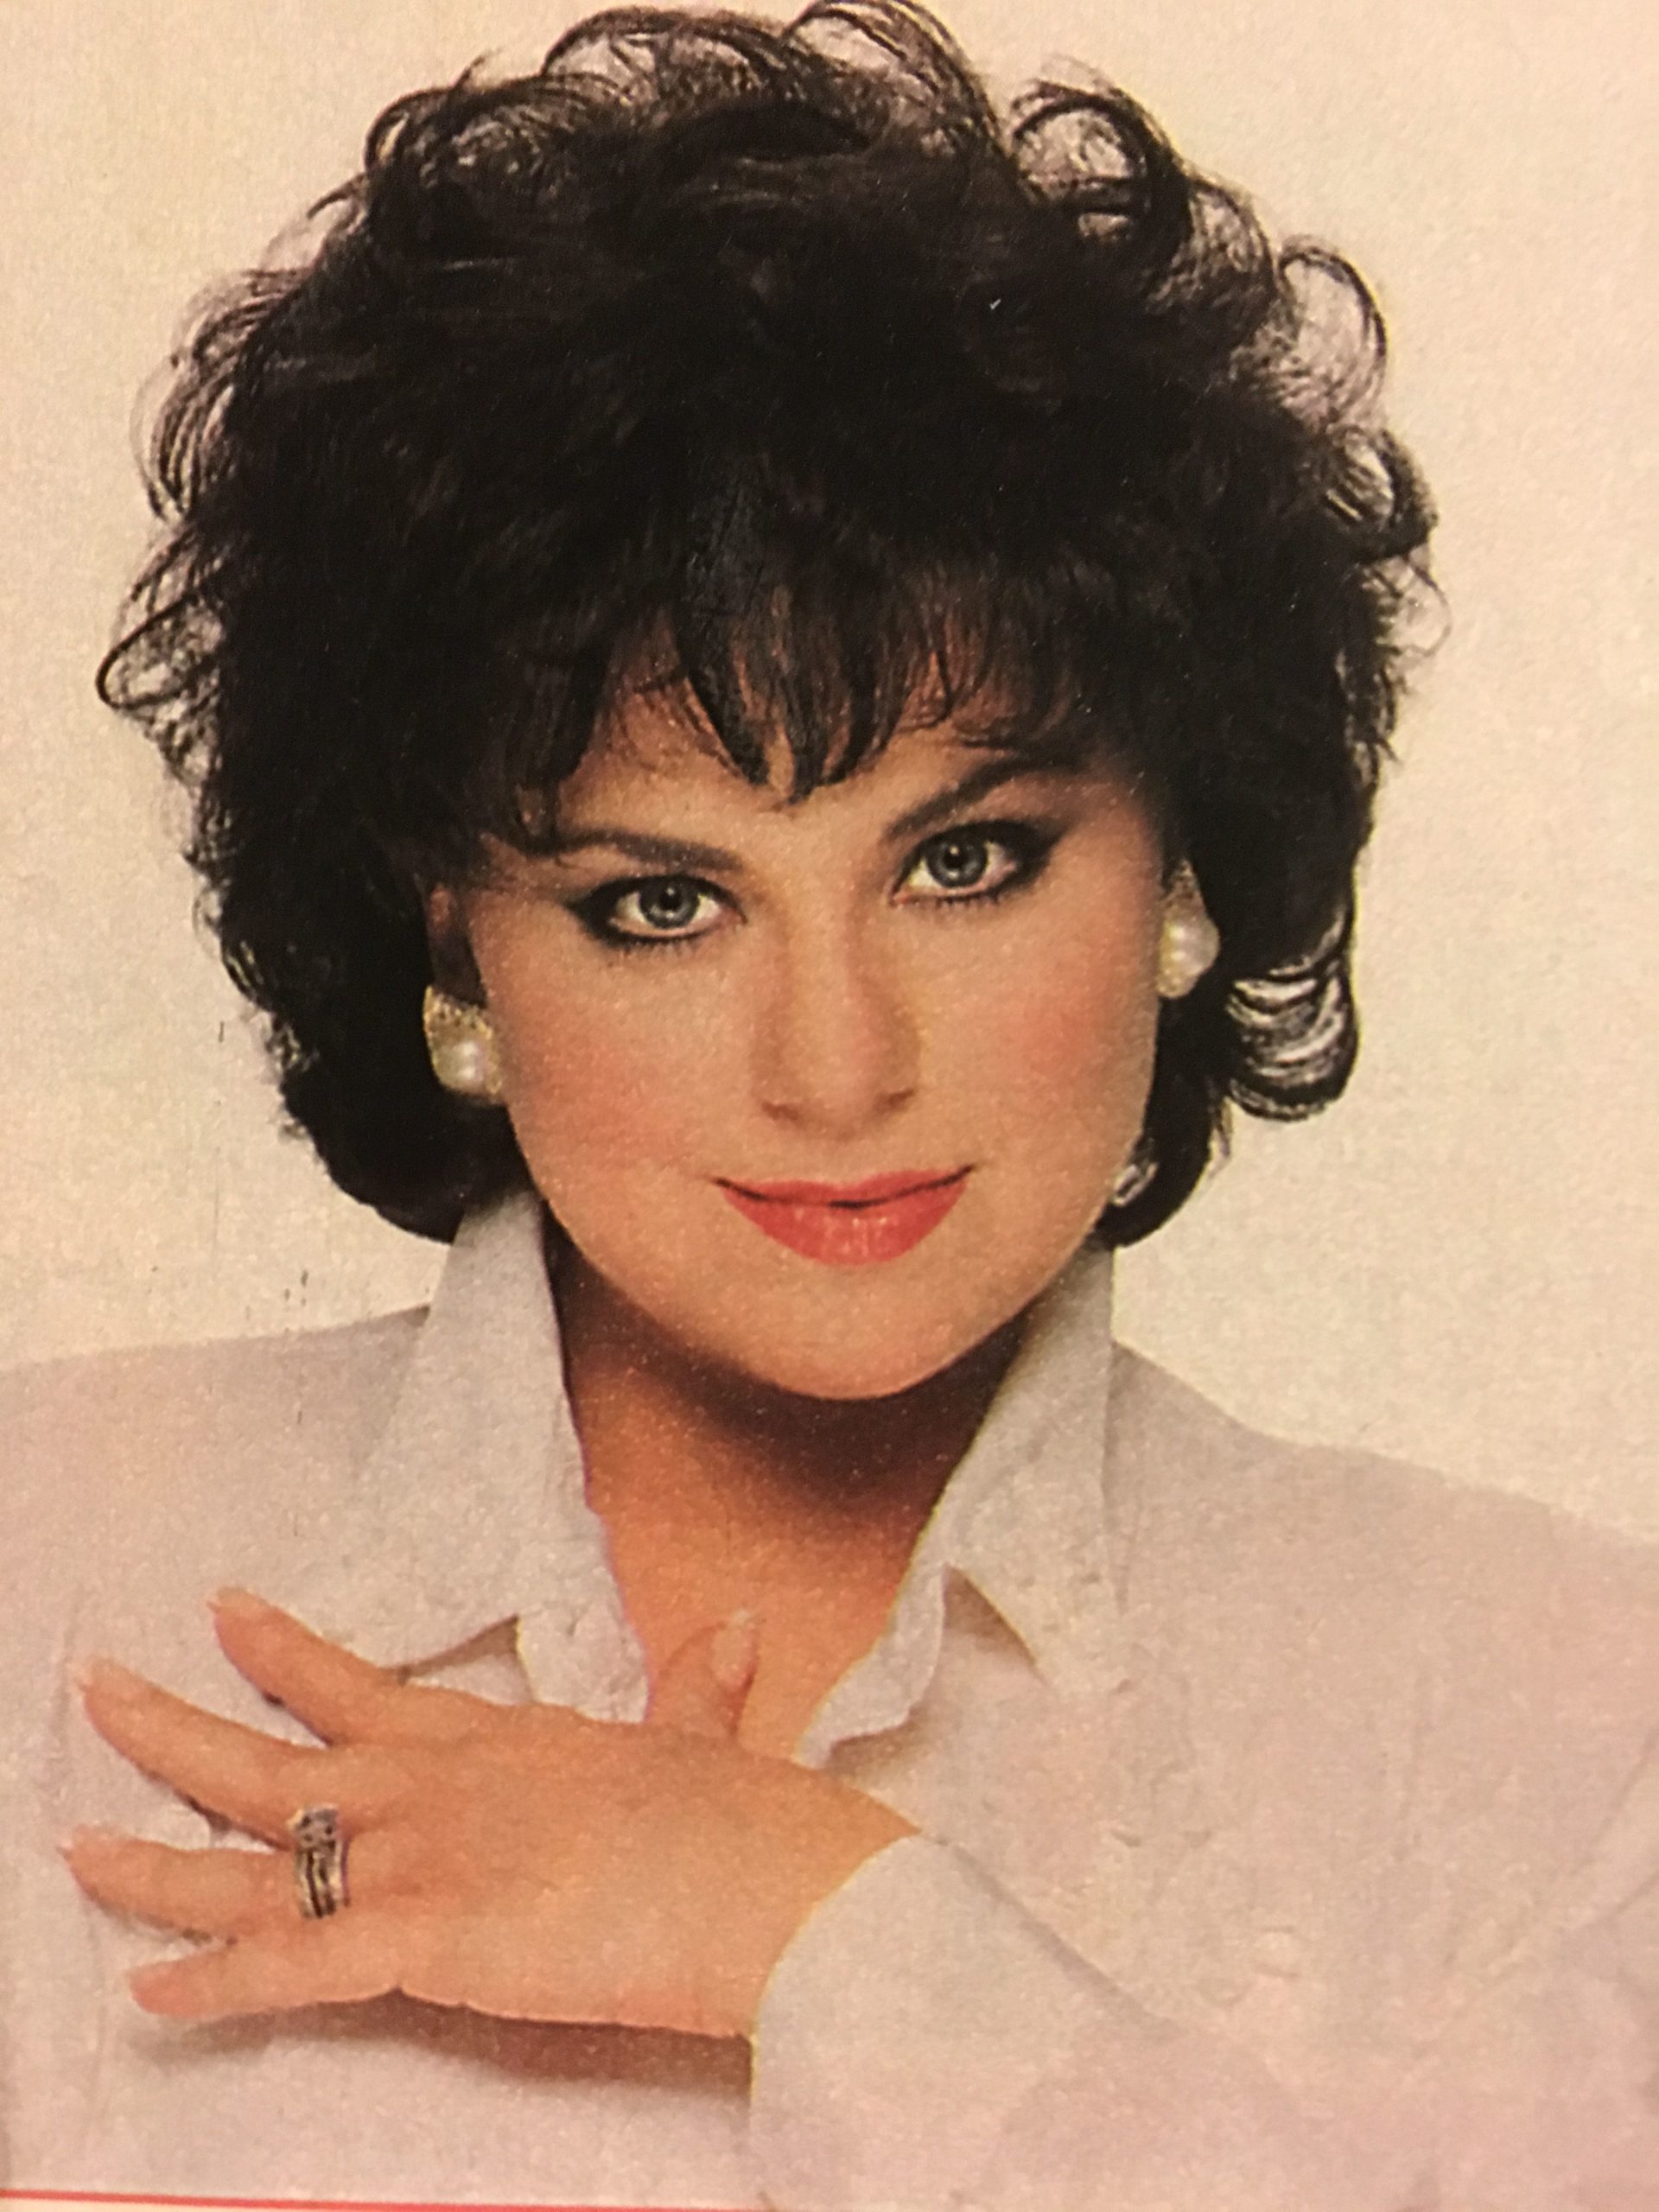 Delta Burke weight loss and net worth this is her today